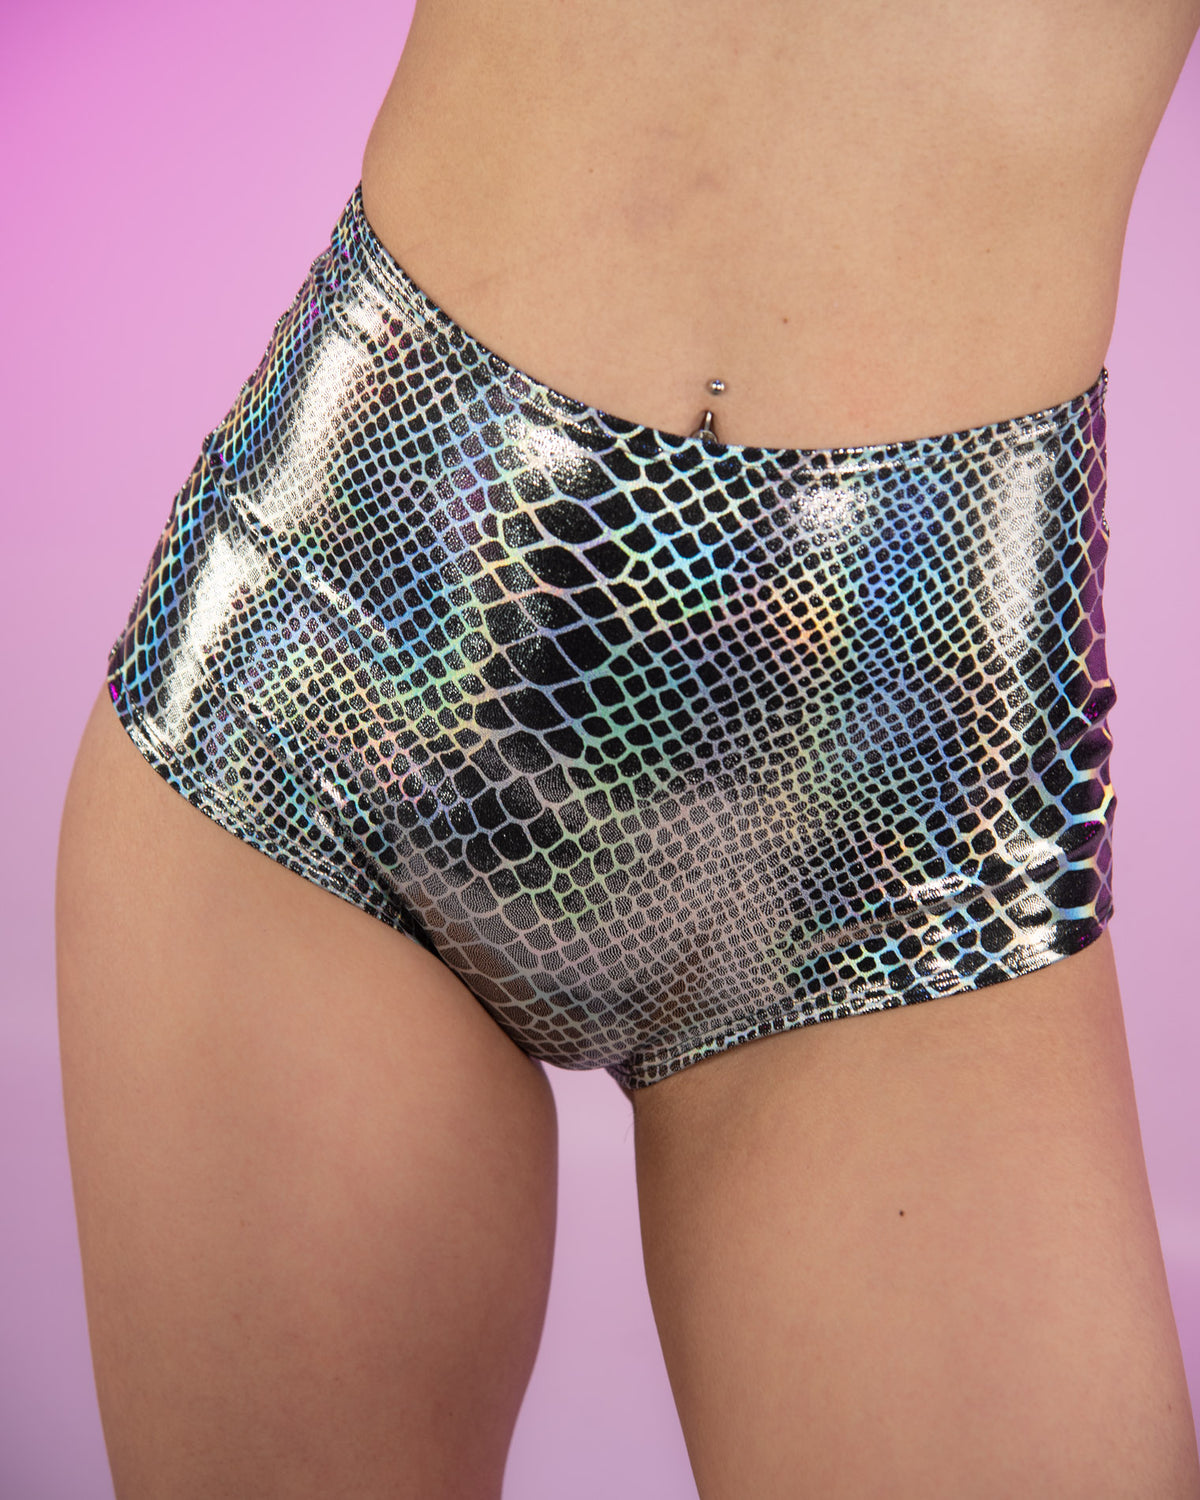 Butterfly Oasis High-Waisted Sequin Shorts w/ Ruffle Trim S | Rave Wonderland | Outfits Rave | Festival Outfits | Rave Clothes